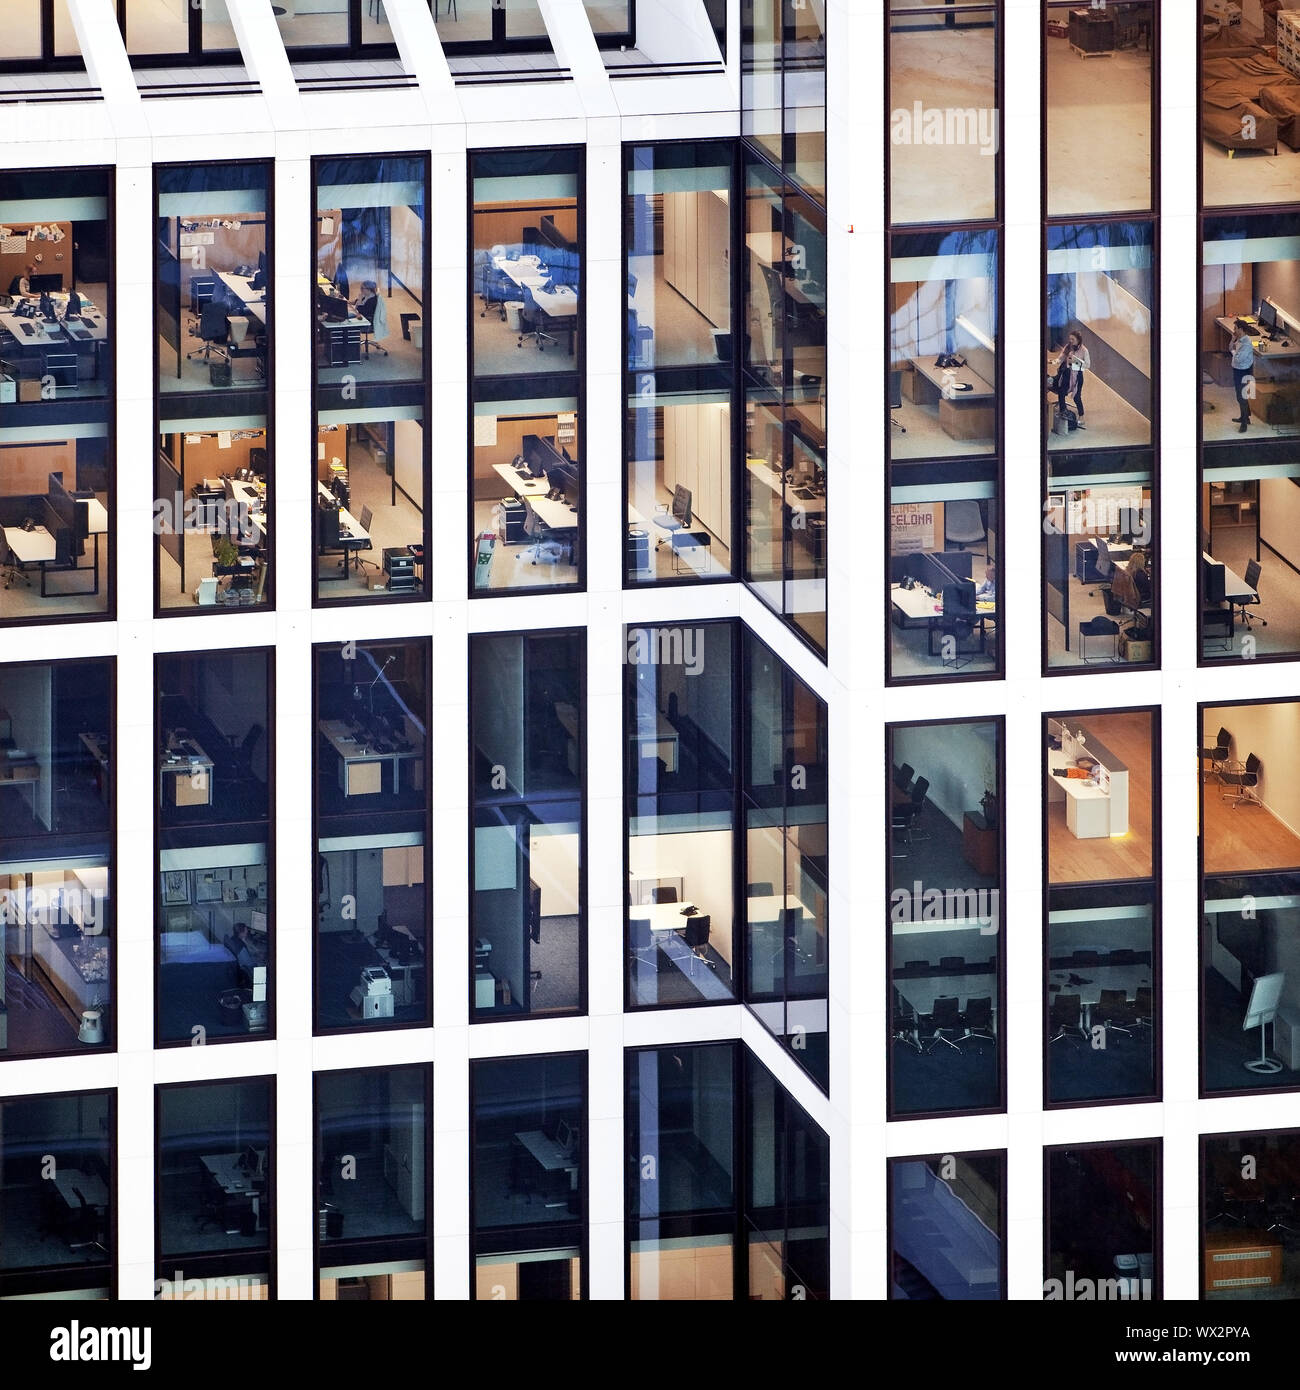 High-rise office building with glass windows, offices with people at work, Taunusturm, Frankfurt Stock Photo